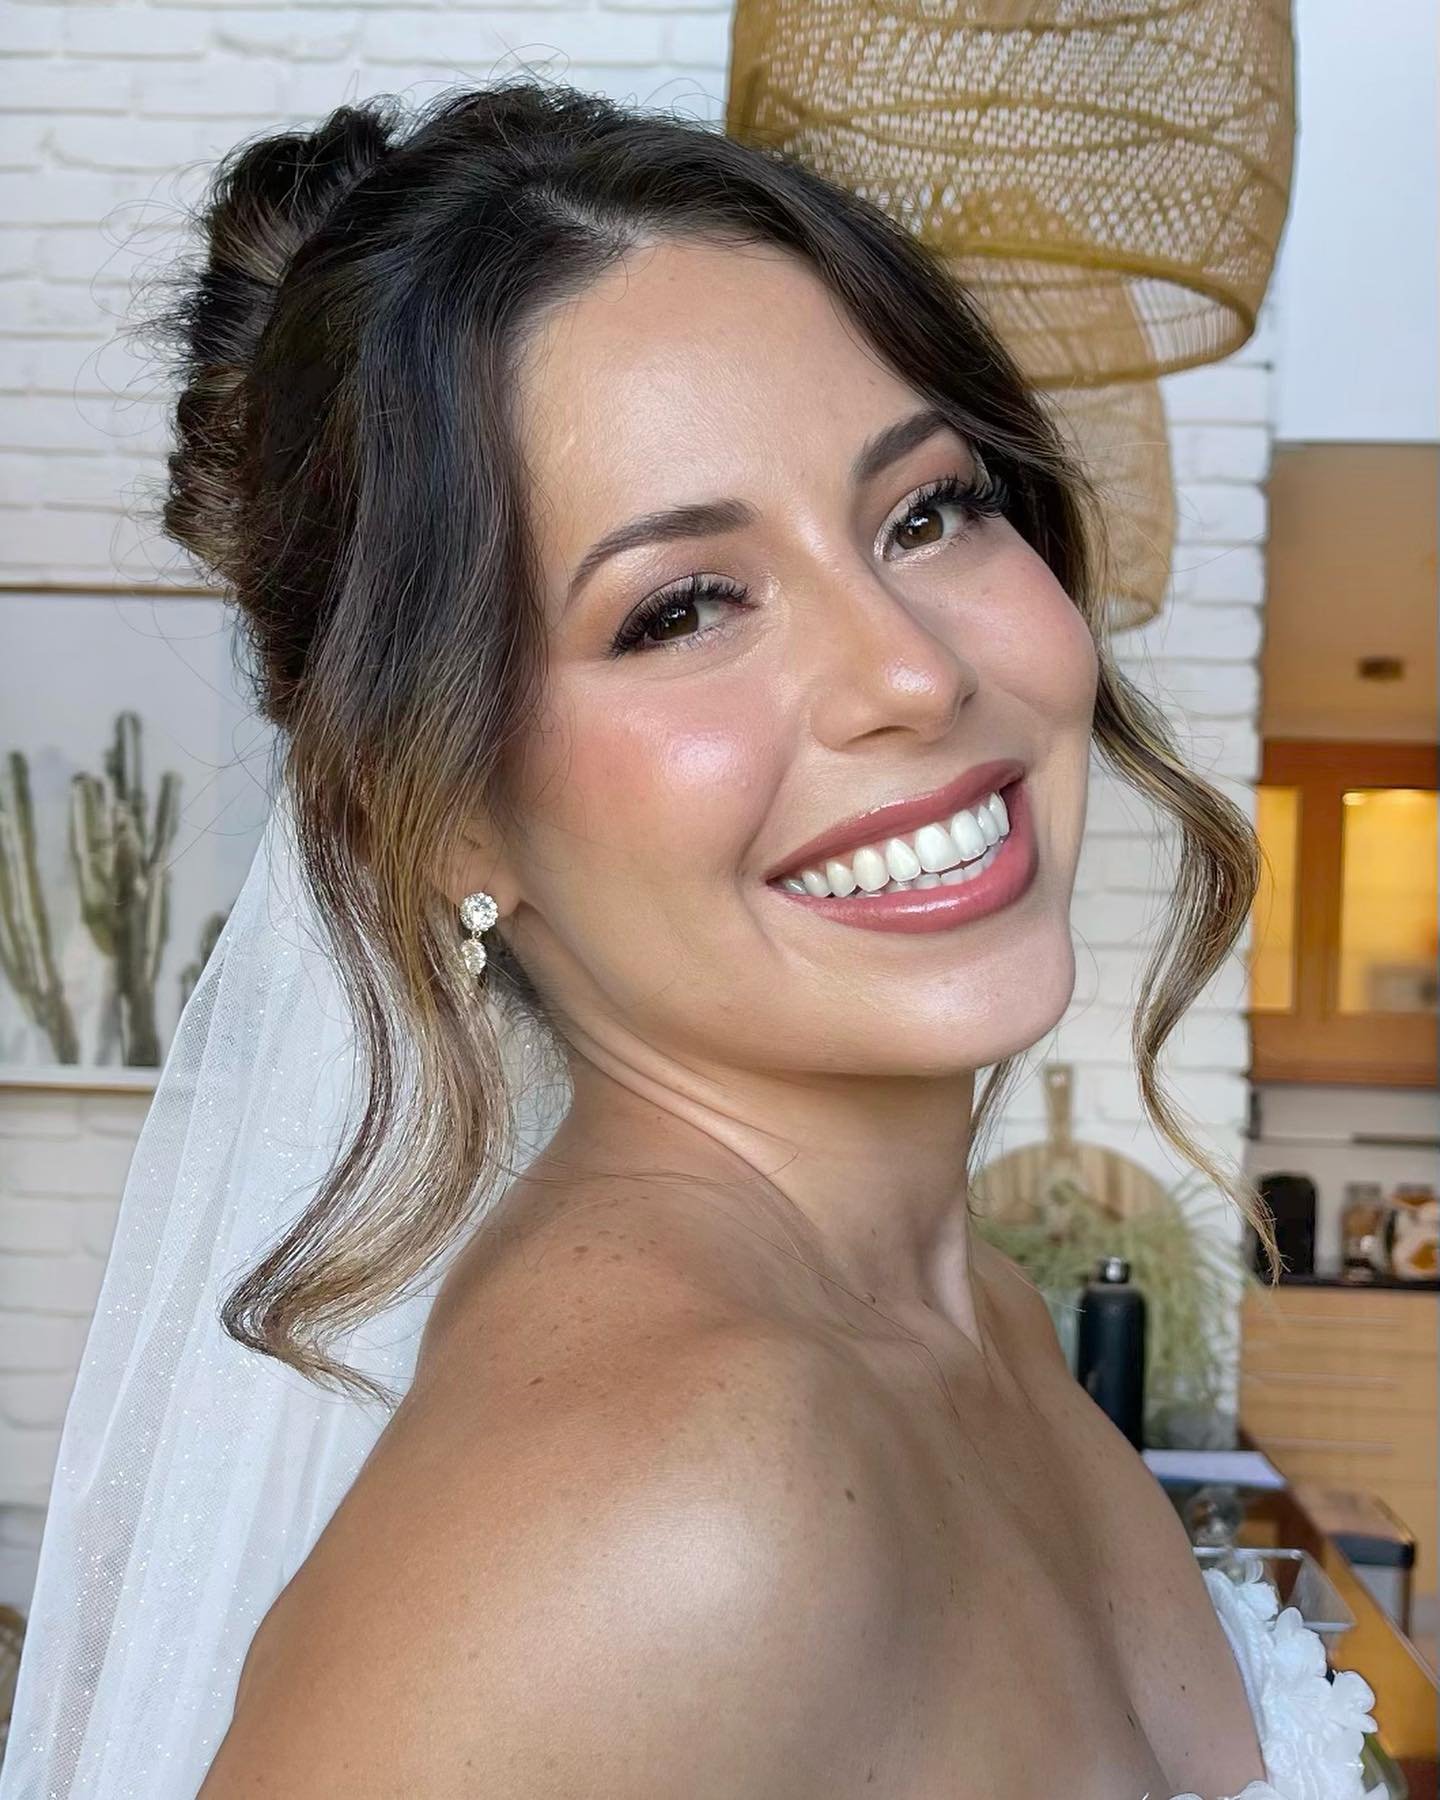 This absolute 10 !!! 
@orimacias you made such a spectacular bride x
.
.
.
#byronbay #byronbaymakeupartist #byronbaywedding #byronbayweddings #figtreeresturant #byronbaybride #byronbaybridal #goldcoastmakeupartist